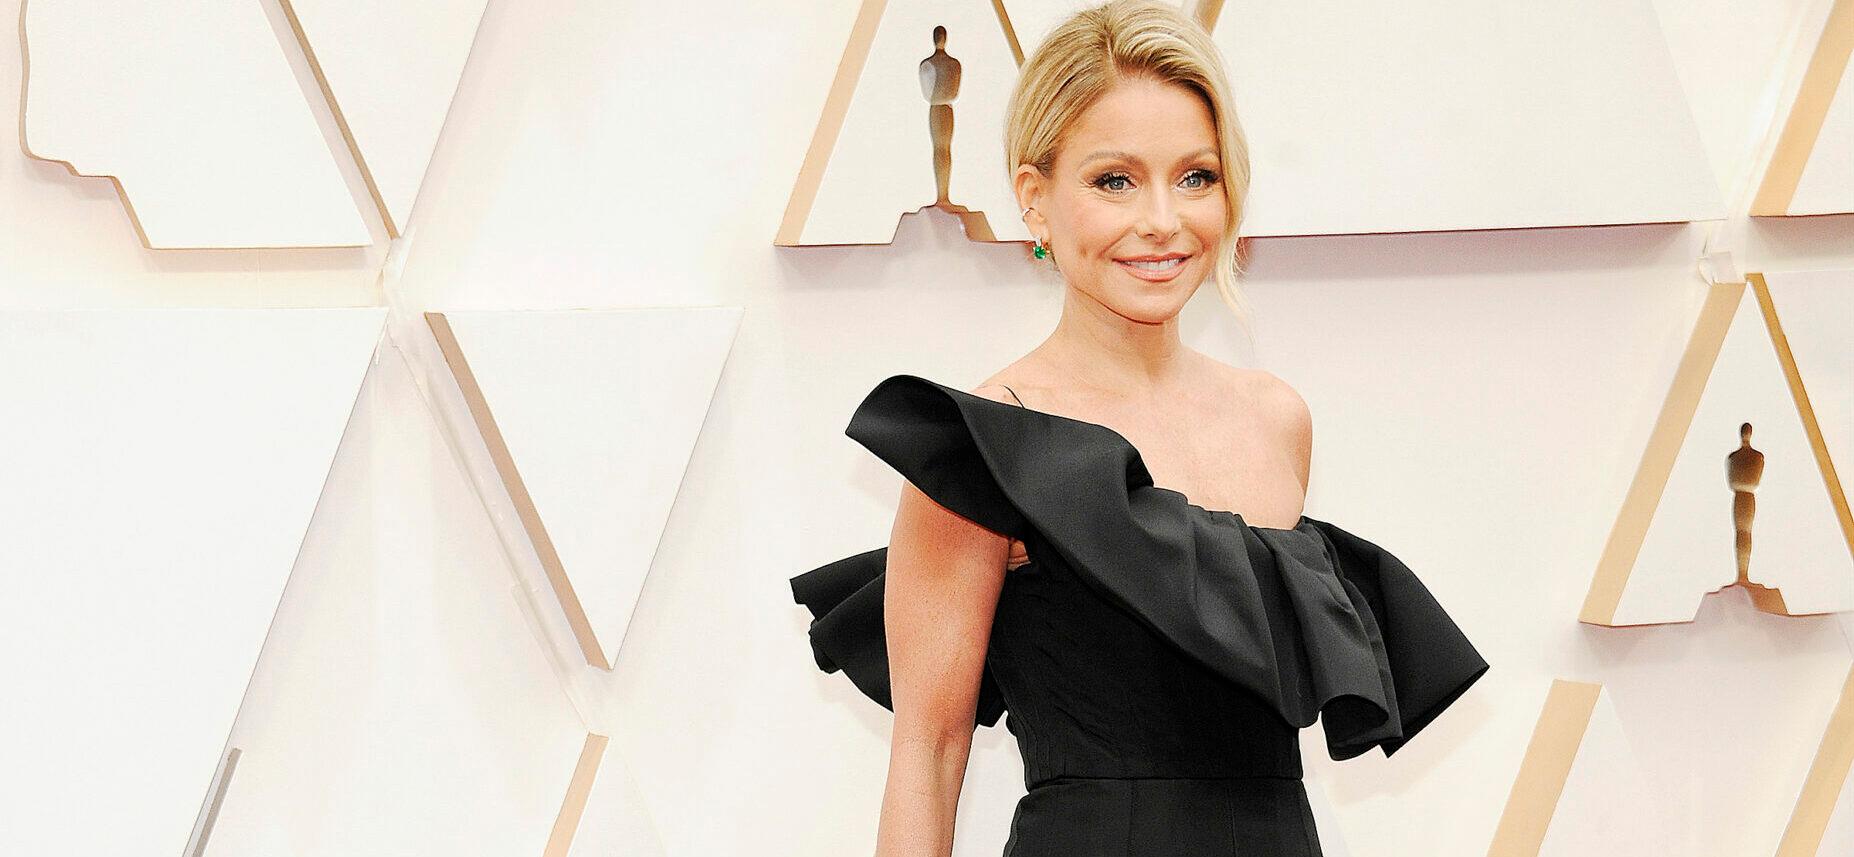 Kelly Ripa Says Thank You to Kathie Lee Gifford for Not Reading Book